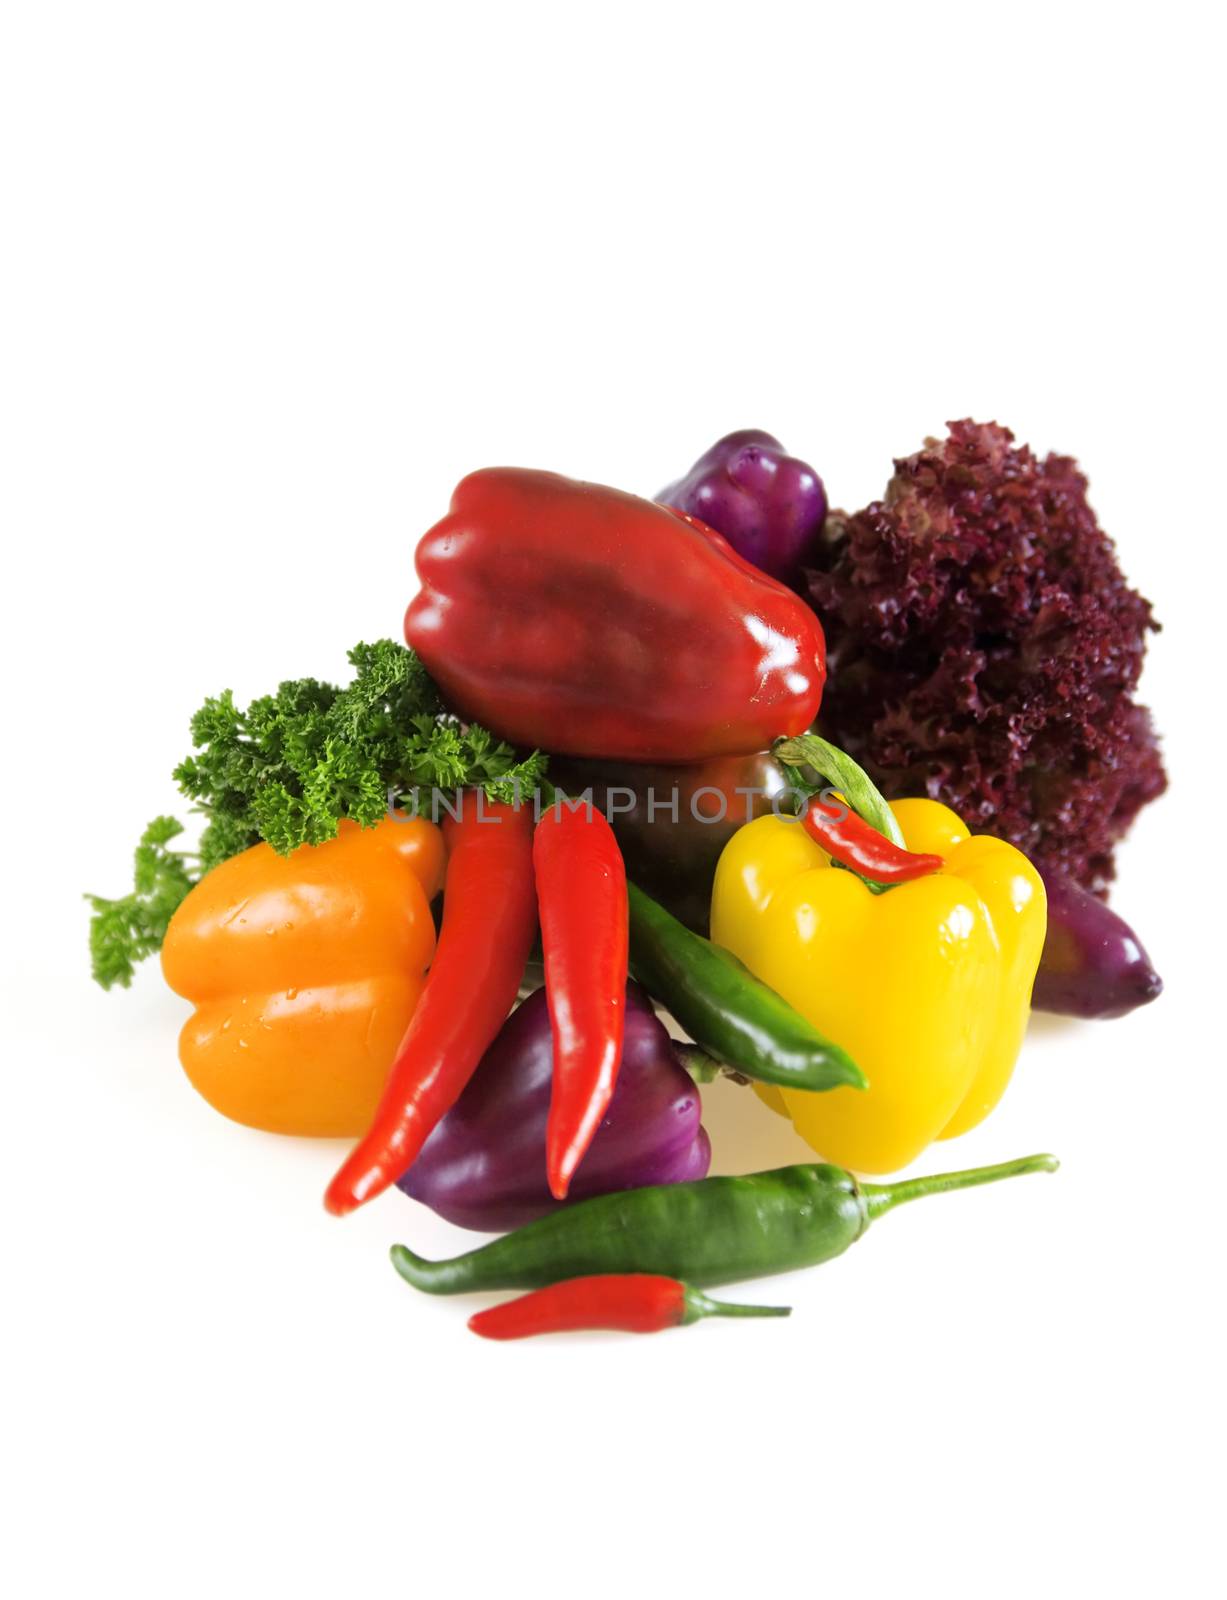 autumn harvest of pepper and eggplant and greens by Serp